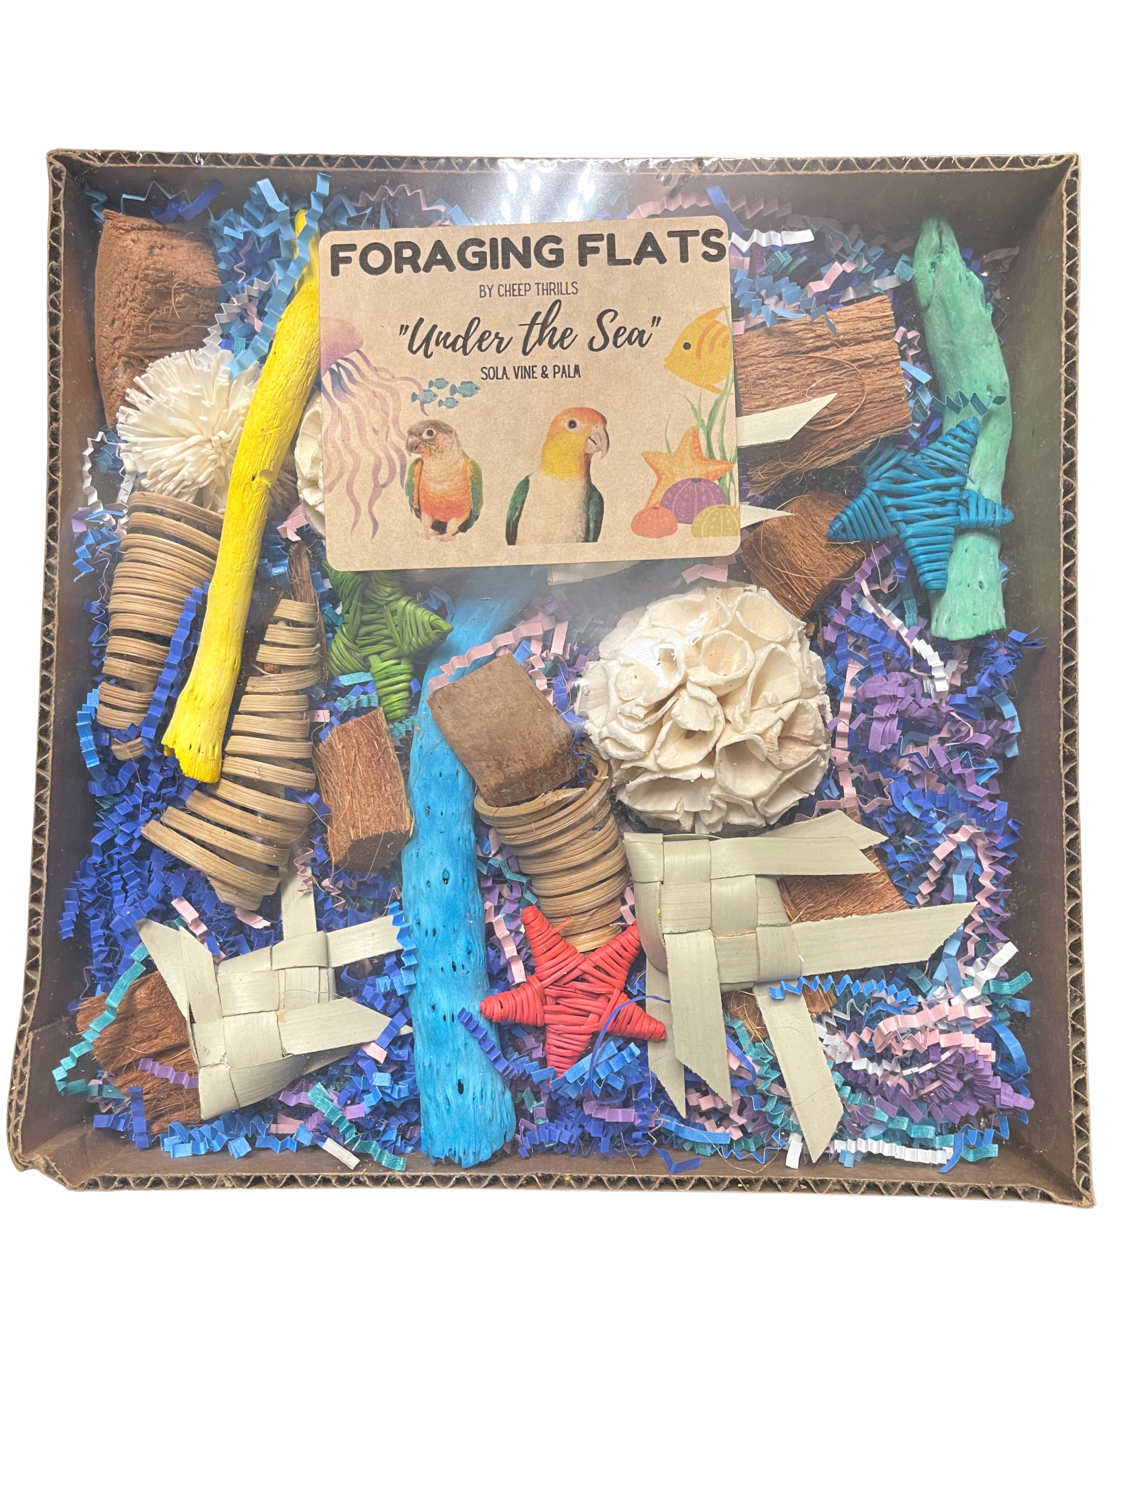 NEW! Under the Sea Foraging Flat by Cheap Thrills Bird Toys